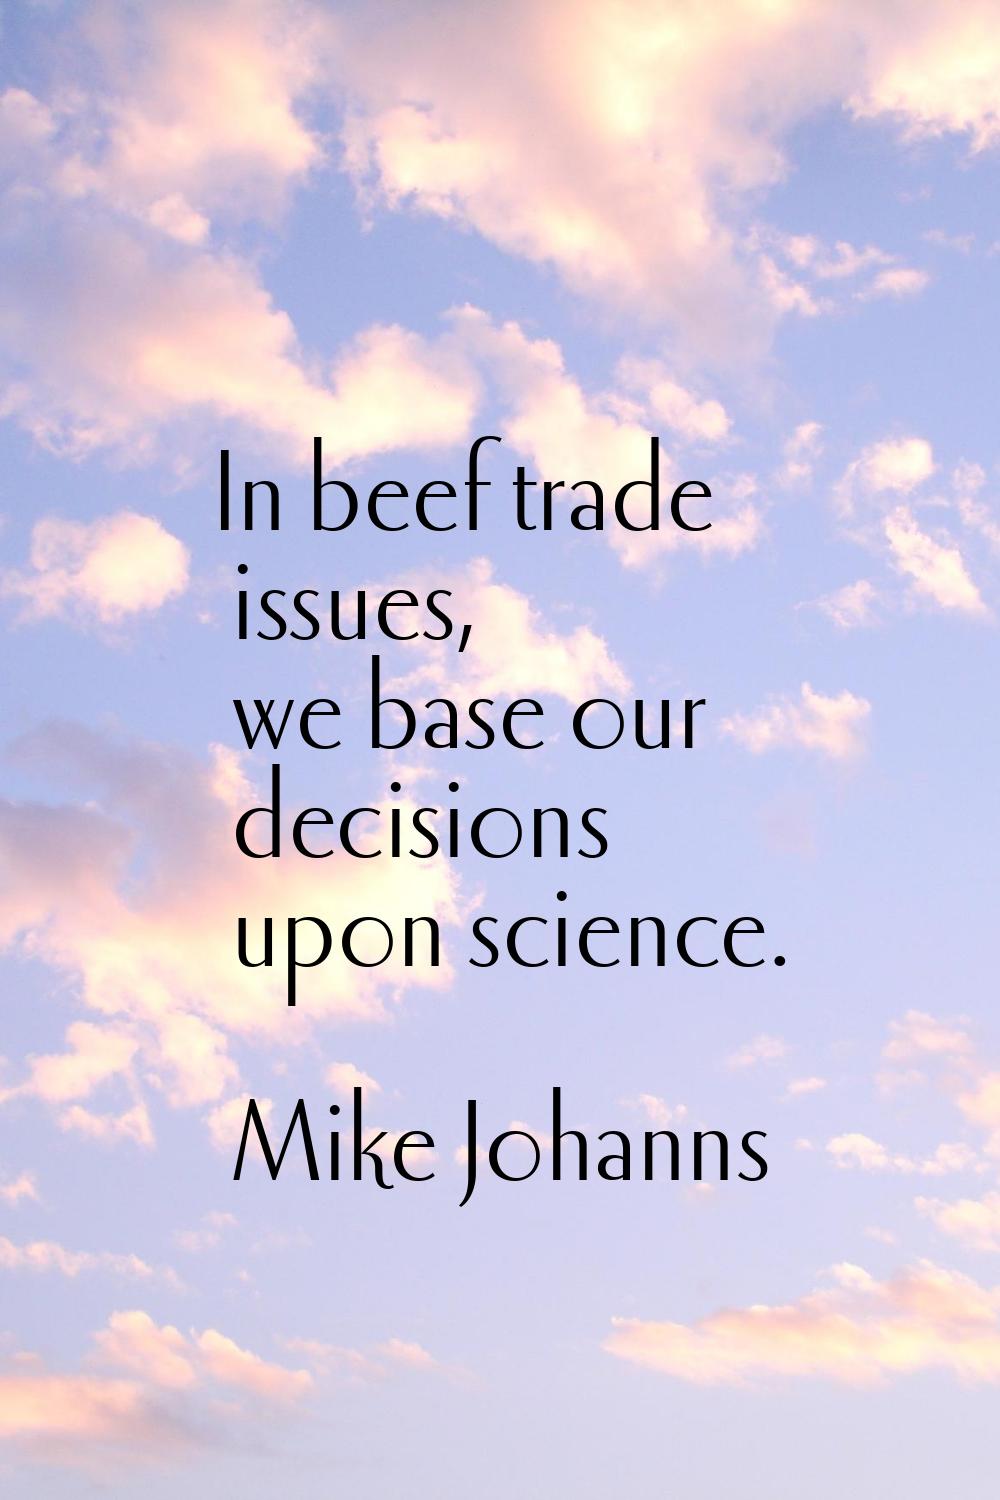 In beef trade issues, we base our decisions upon science.